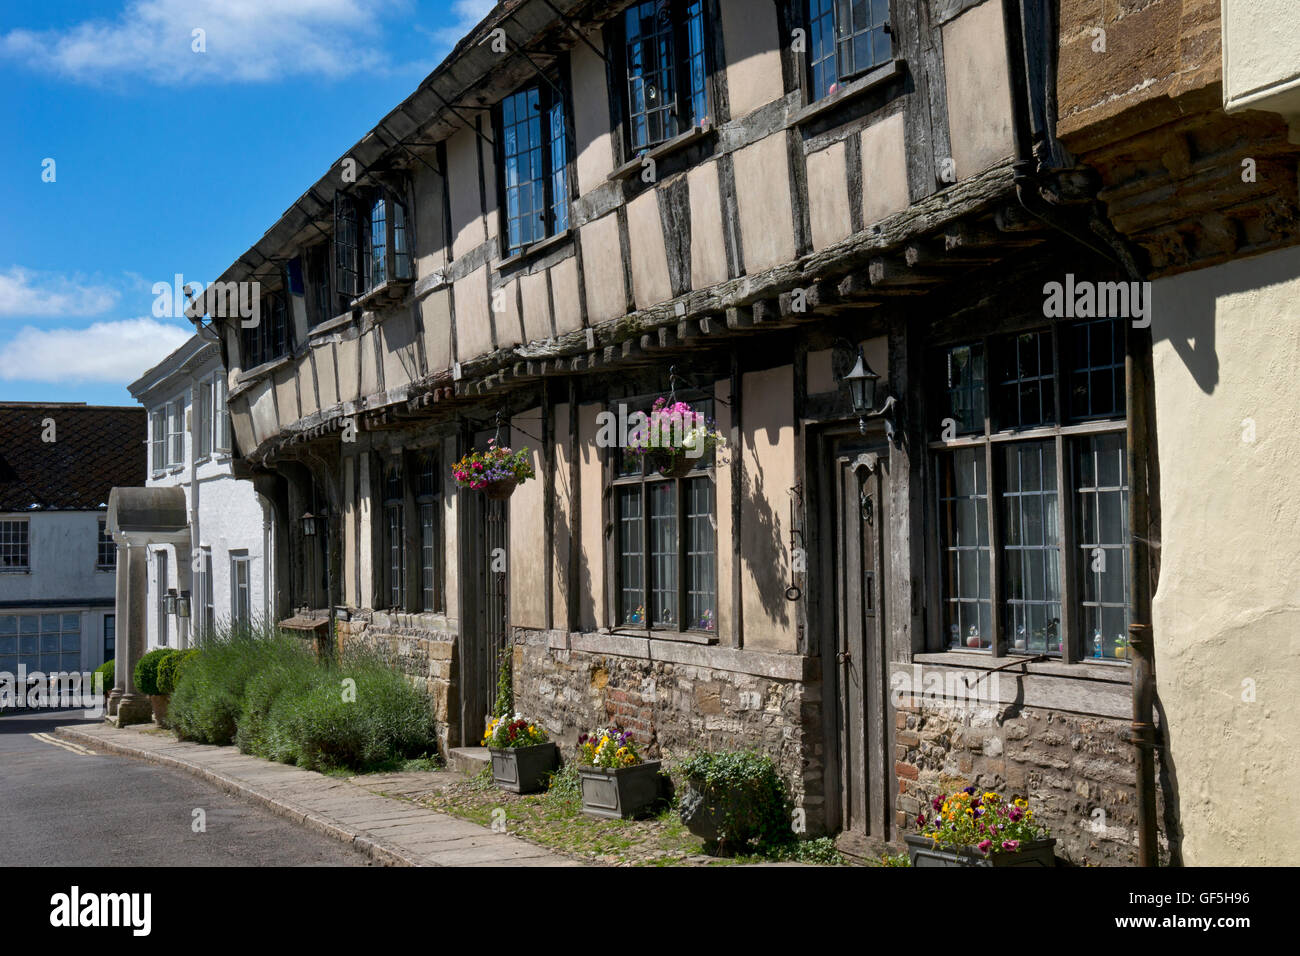 Old buildings in village of Cerne Abbas, Dorset,England Stock Photo